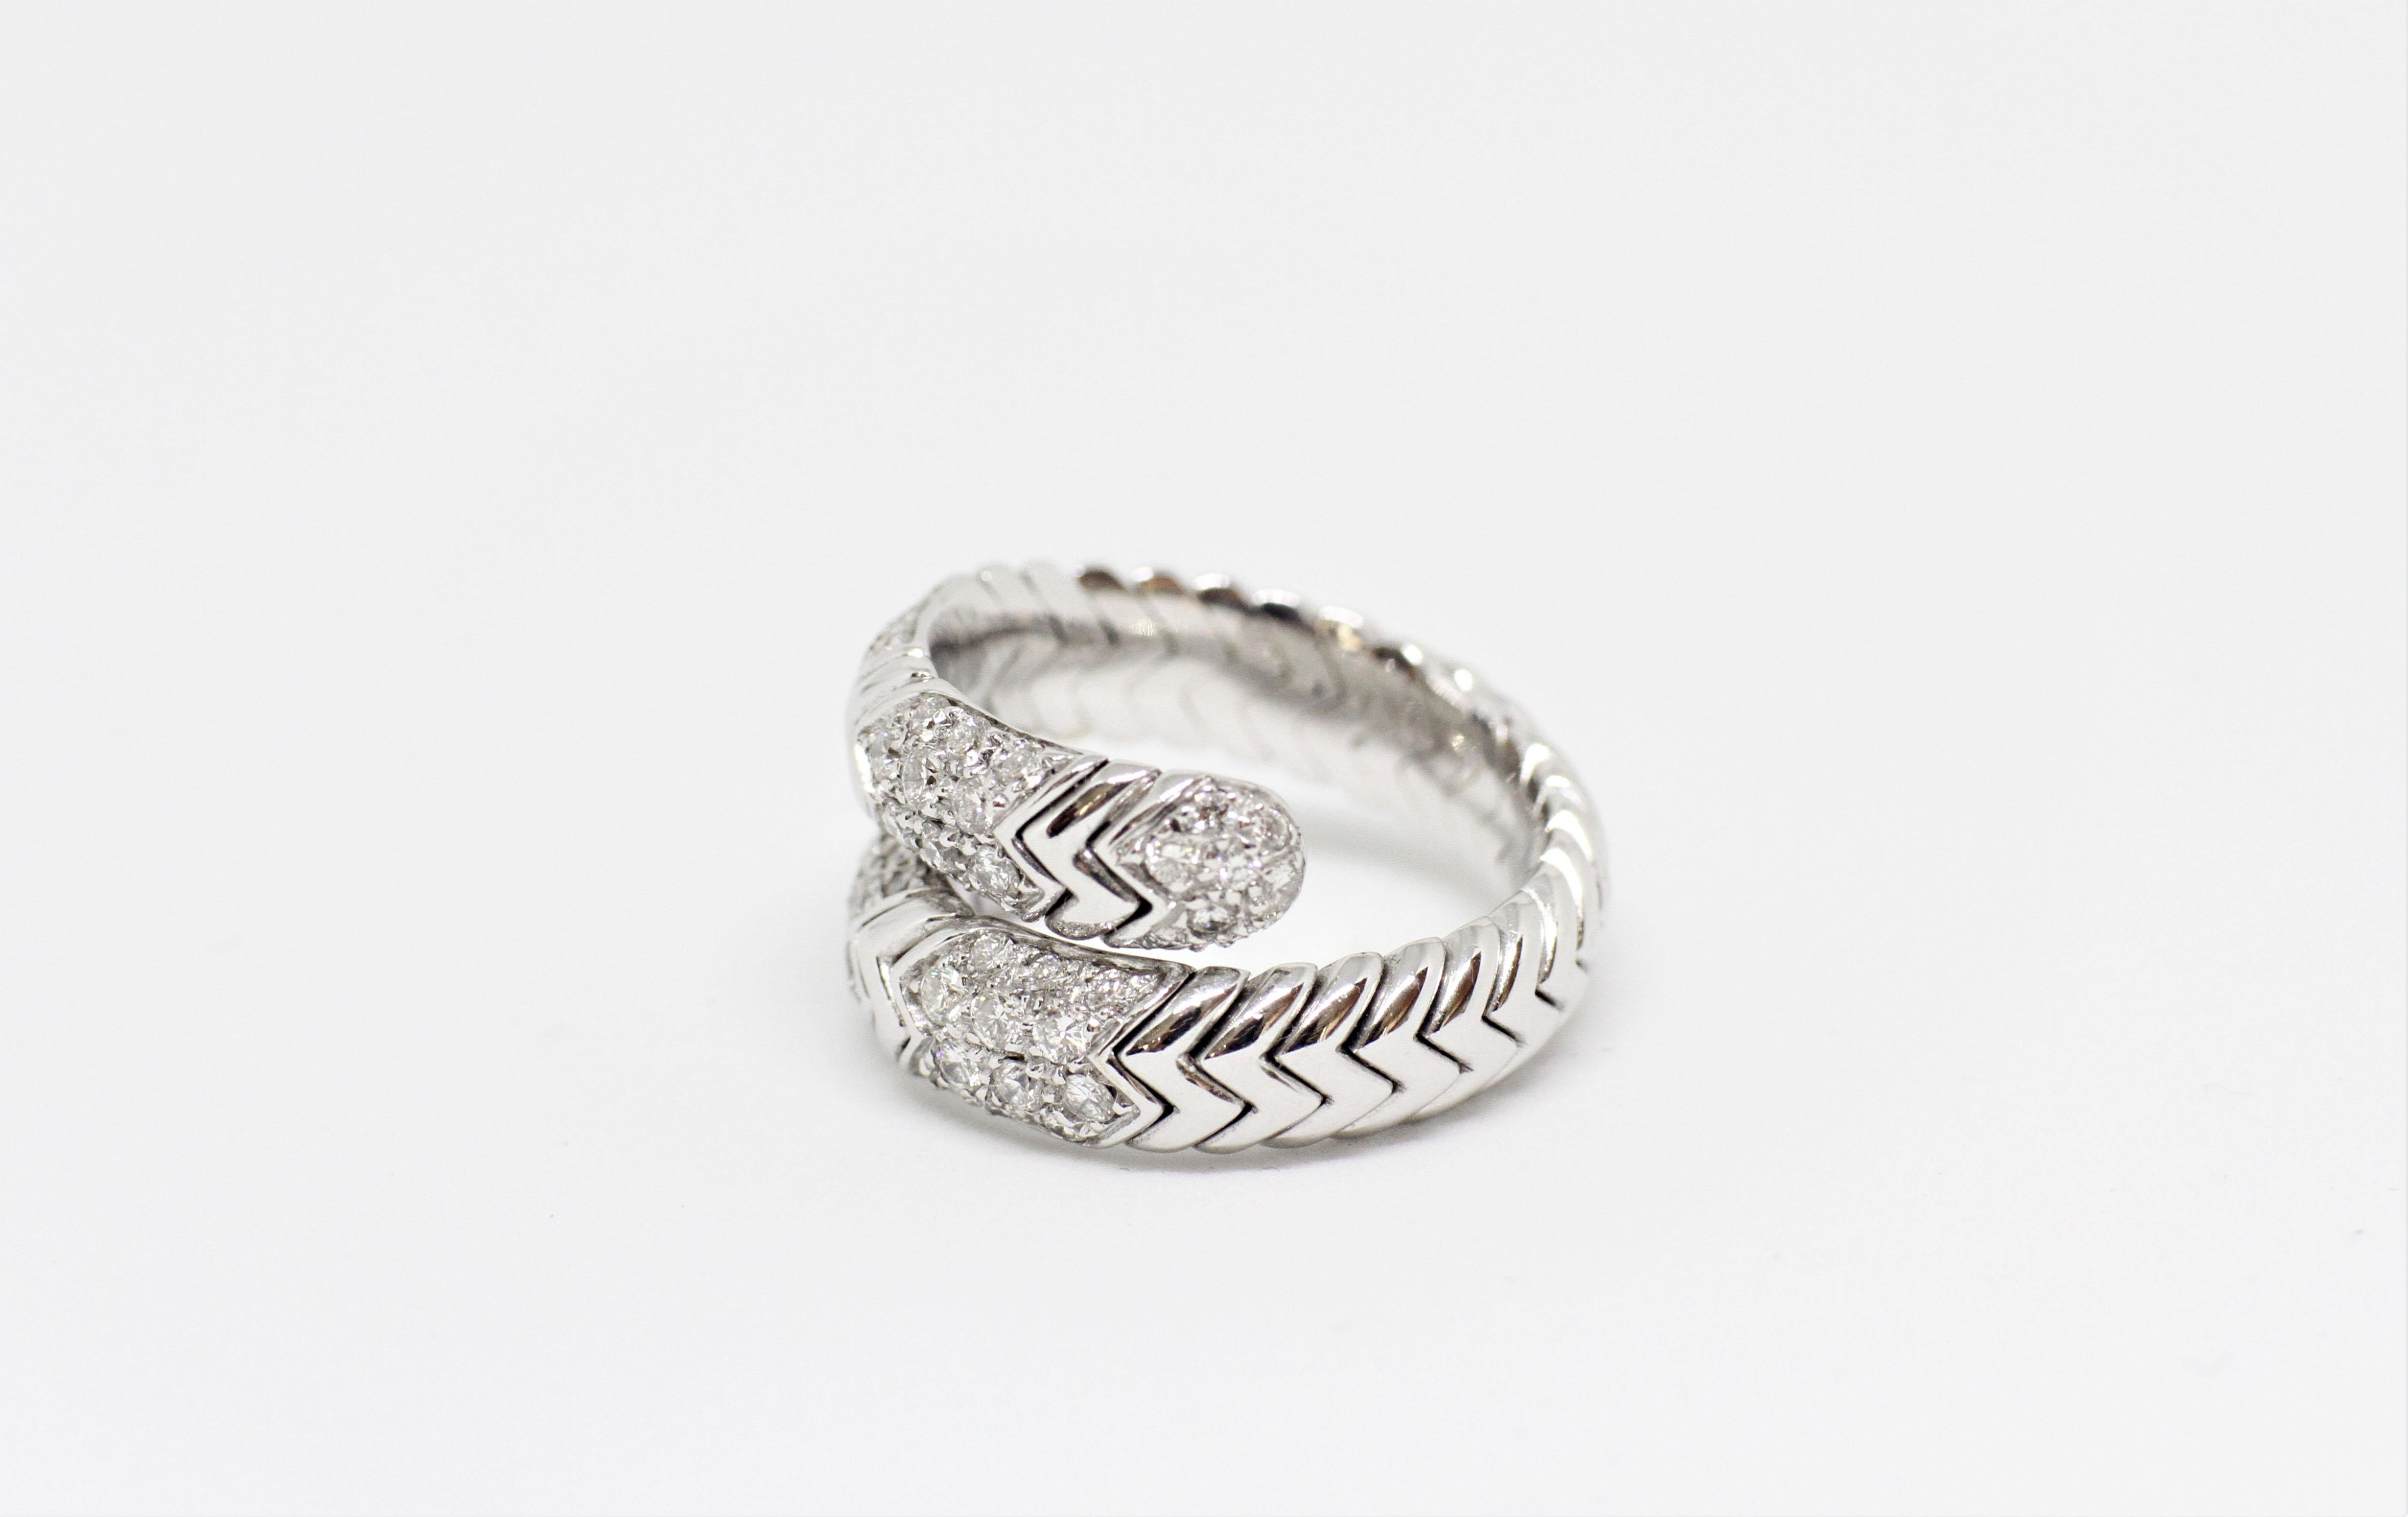 Bulgari Spiga ring set with round brilliant cut diamonds in a grain setting with an approximate weight of 0.75 carats. The ring is twisted with a flexible zig zag snake-like design. Marked Italy BVLGARI 18K. UK finger size 'N'.